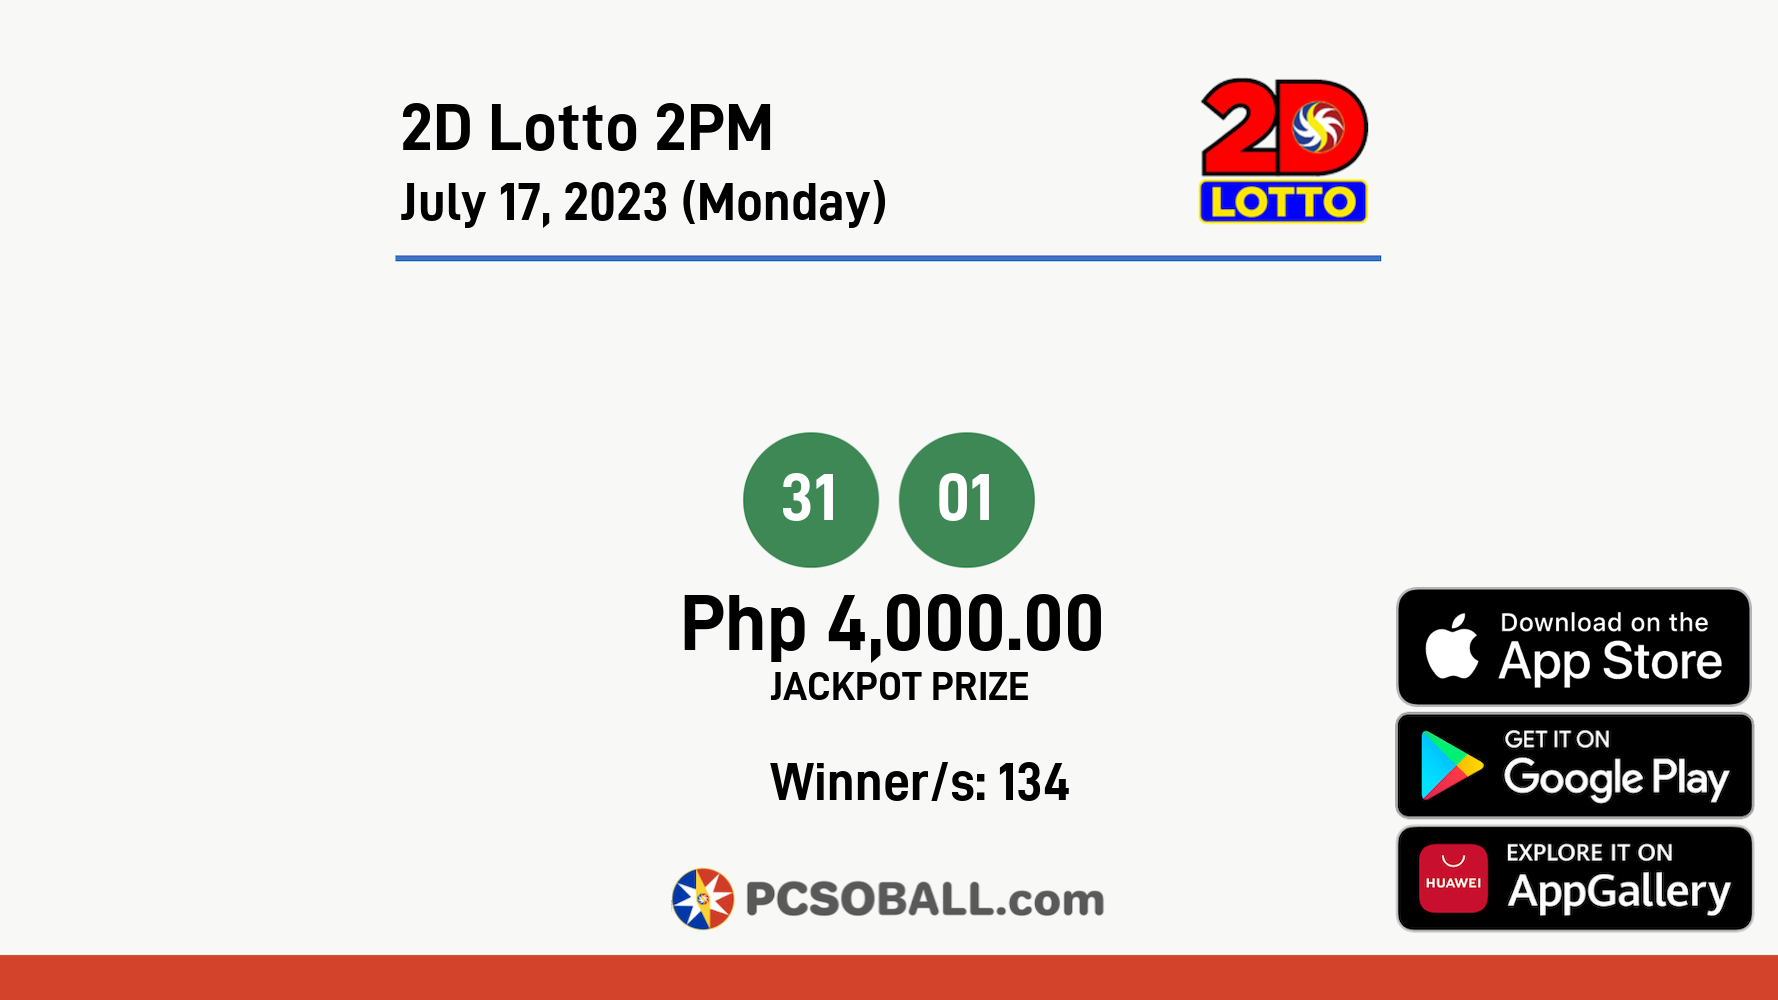 2D Lotto 2PM July 17, 2023 (Monday) Result